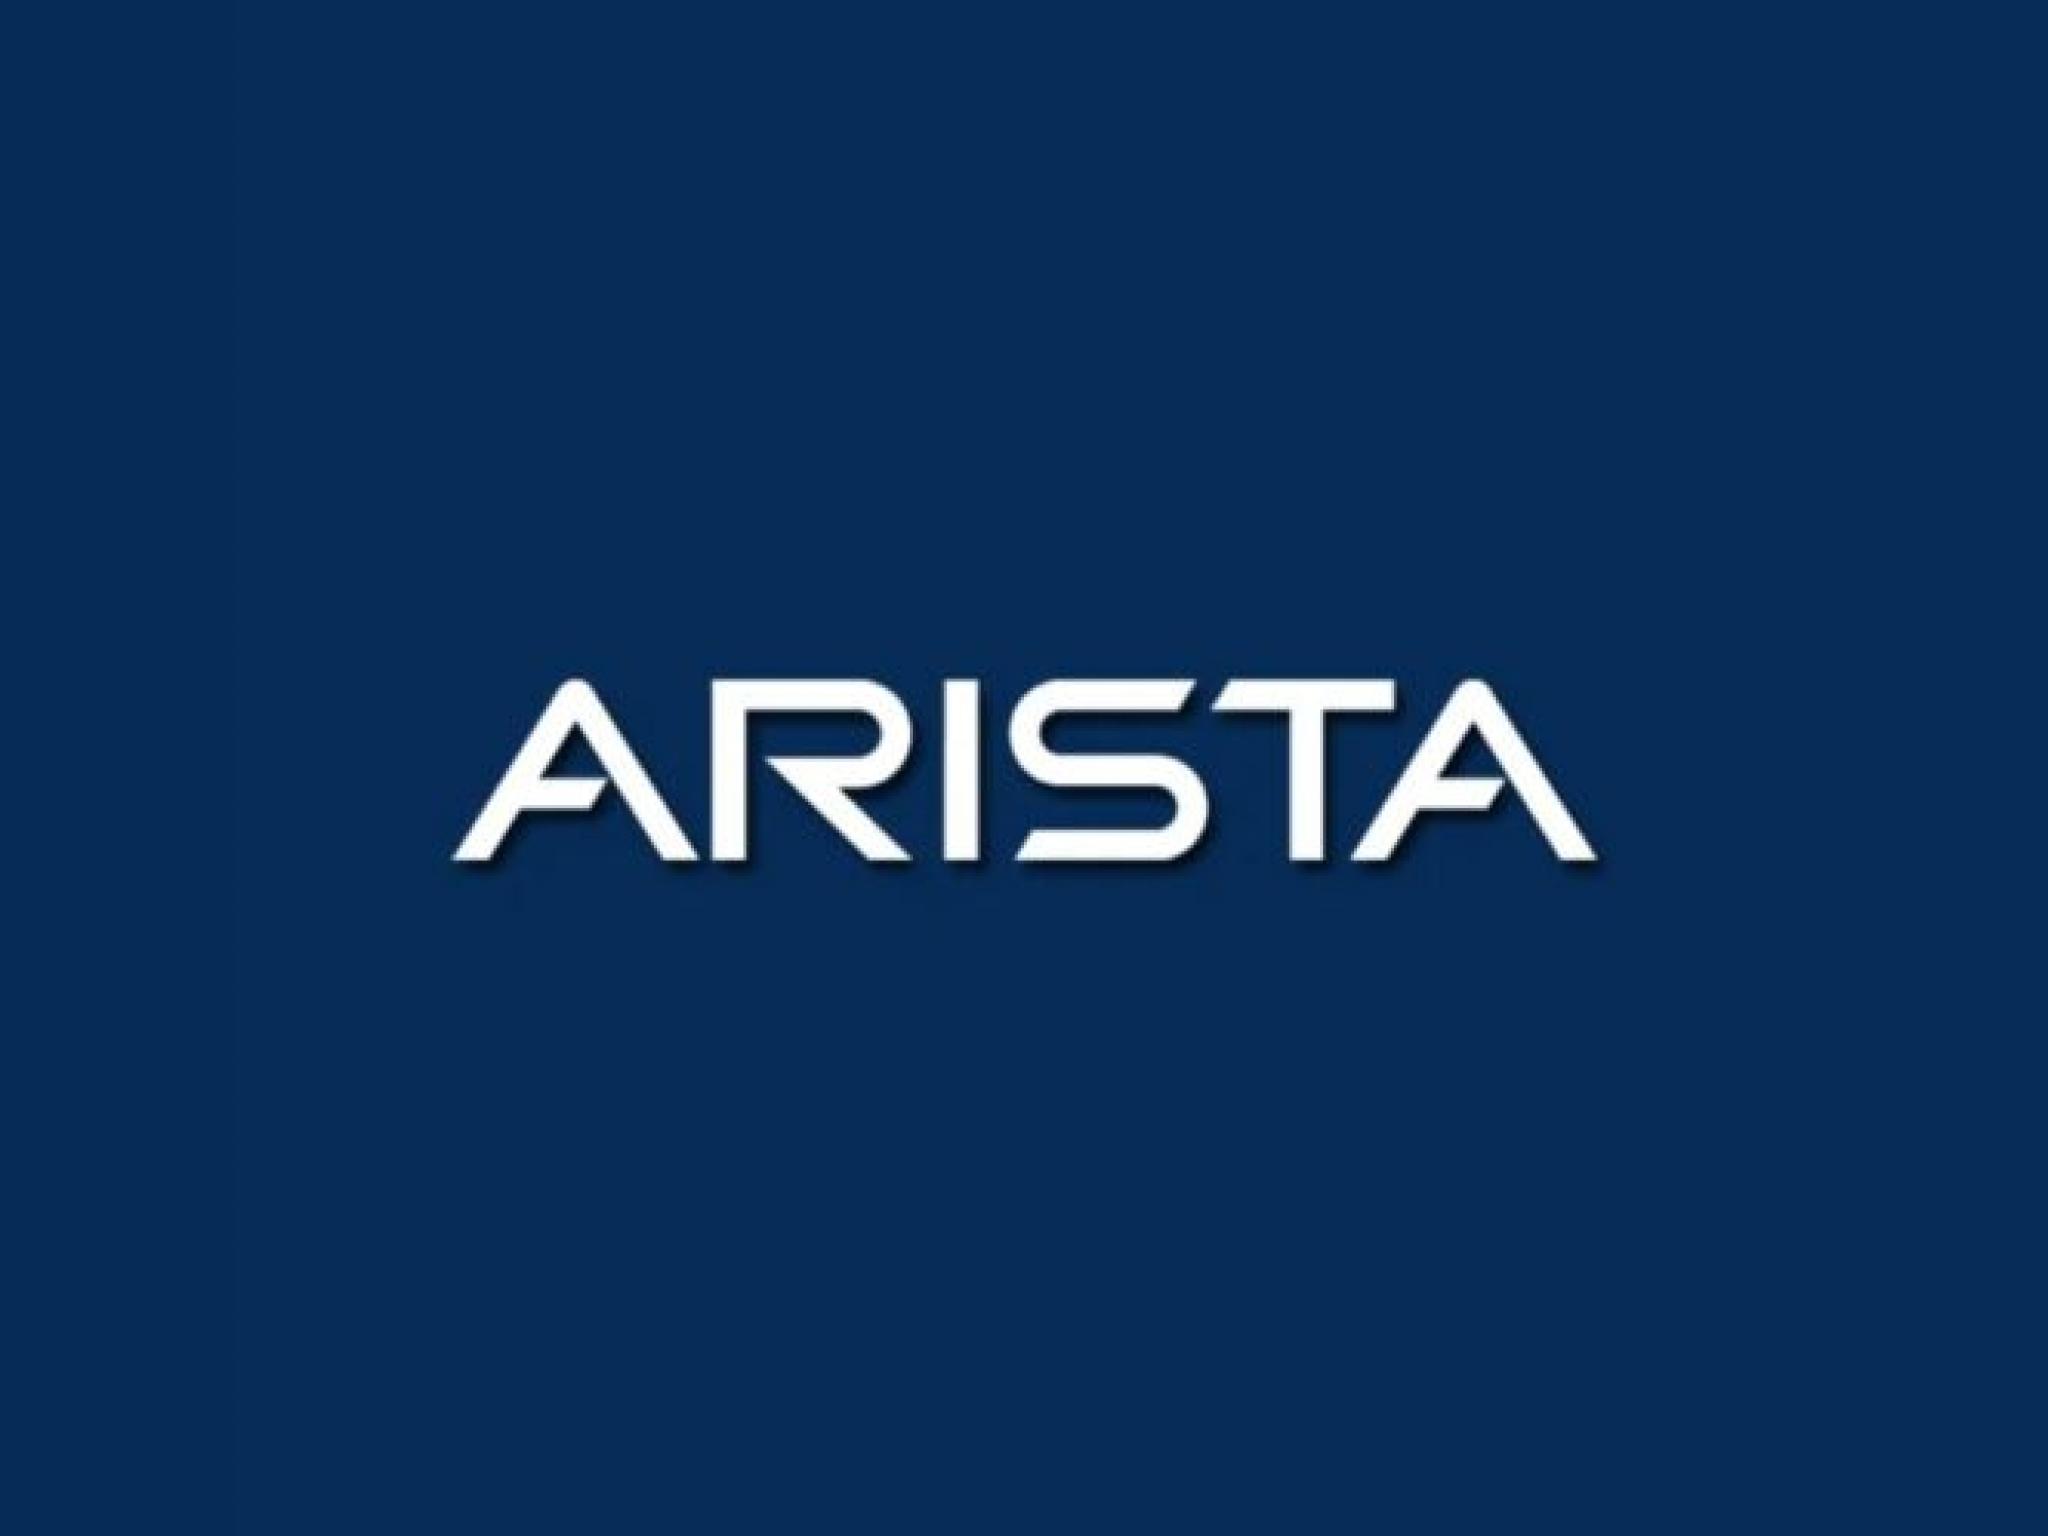  arista-networks-earnings-are-imminent-these-most-accurate-analysts-revise-forecasts-ahead-of-earnings-call 